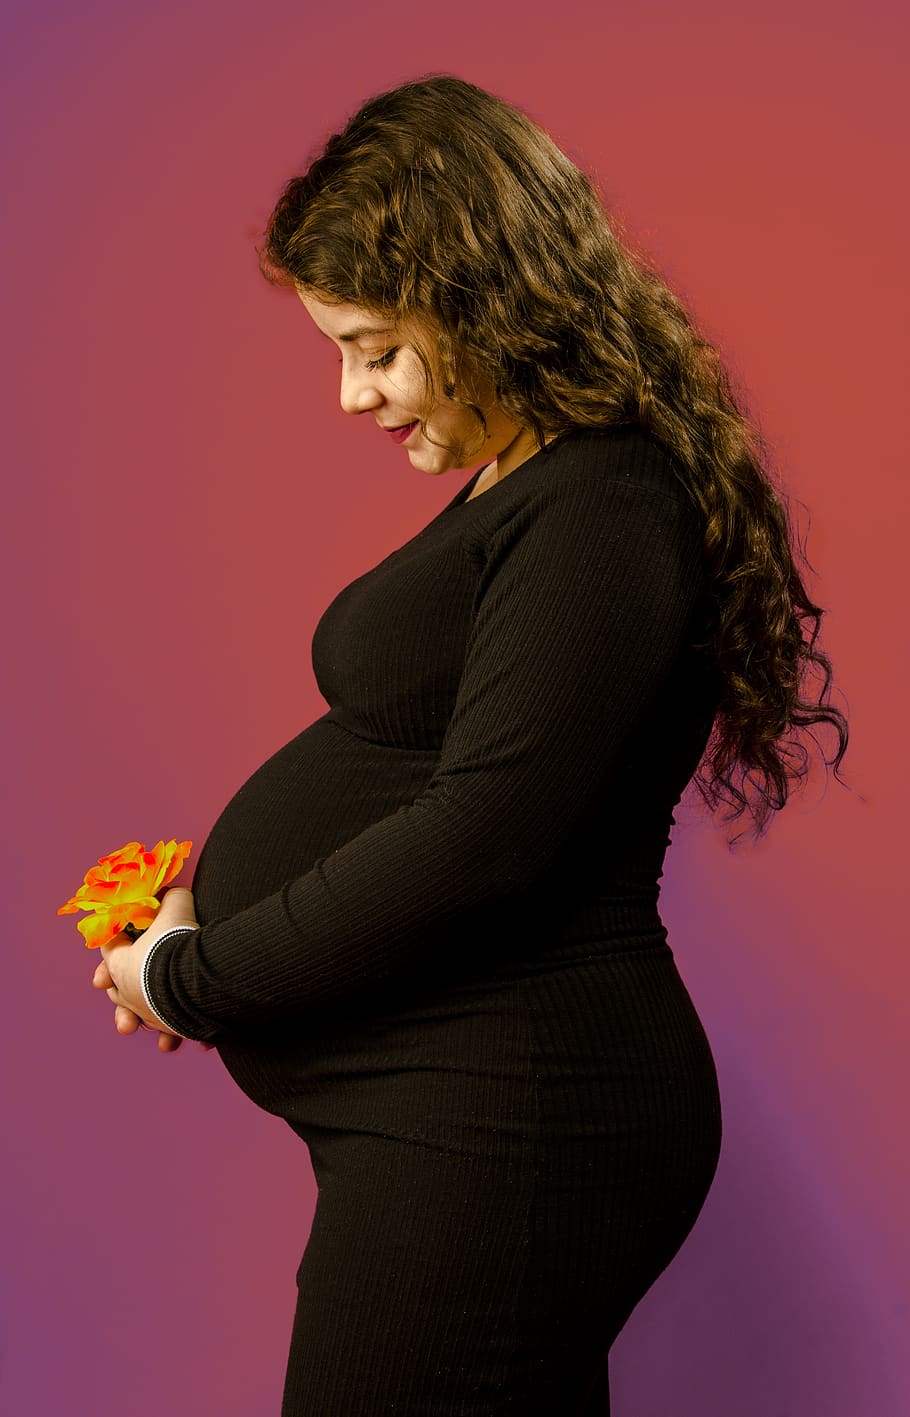 HD wallpaper: pregnant woman, flower, belly, mother, big